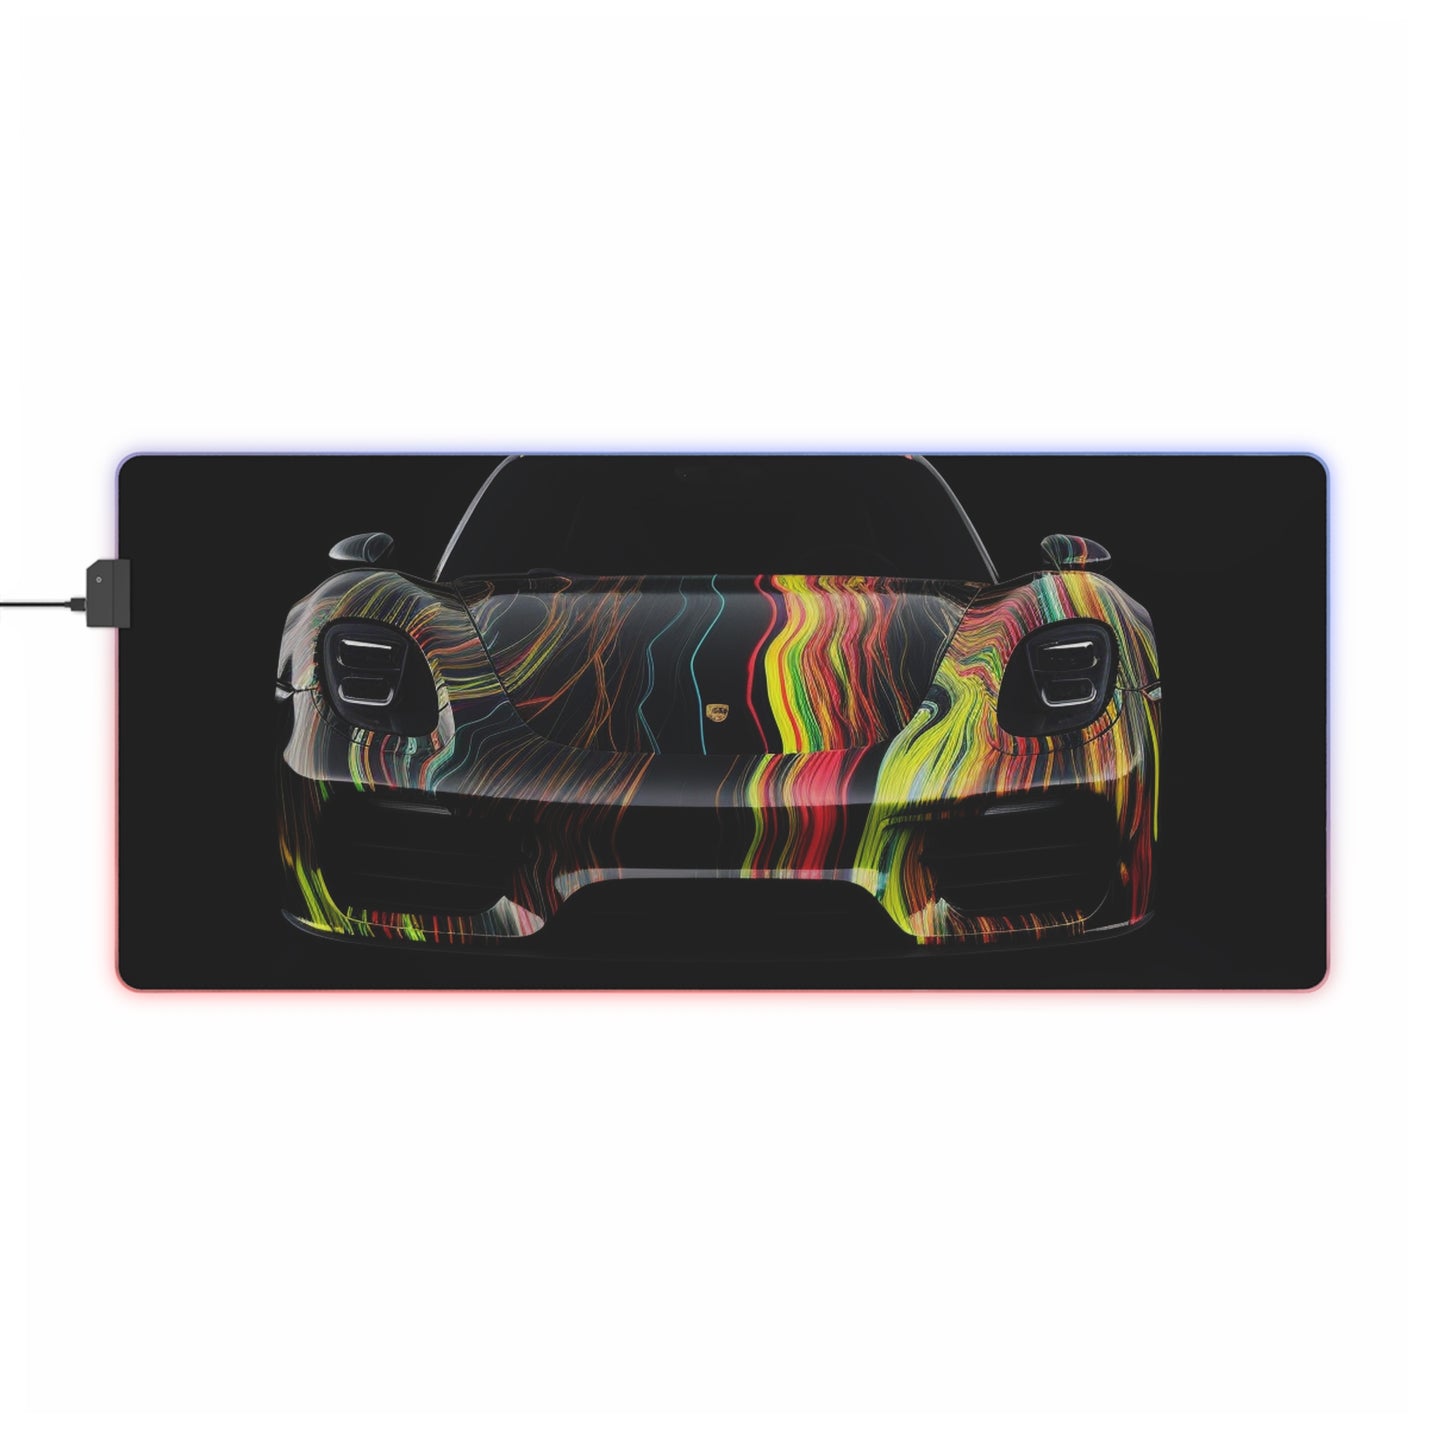 LED Gaming Mouse Pad Porsche Line 2